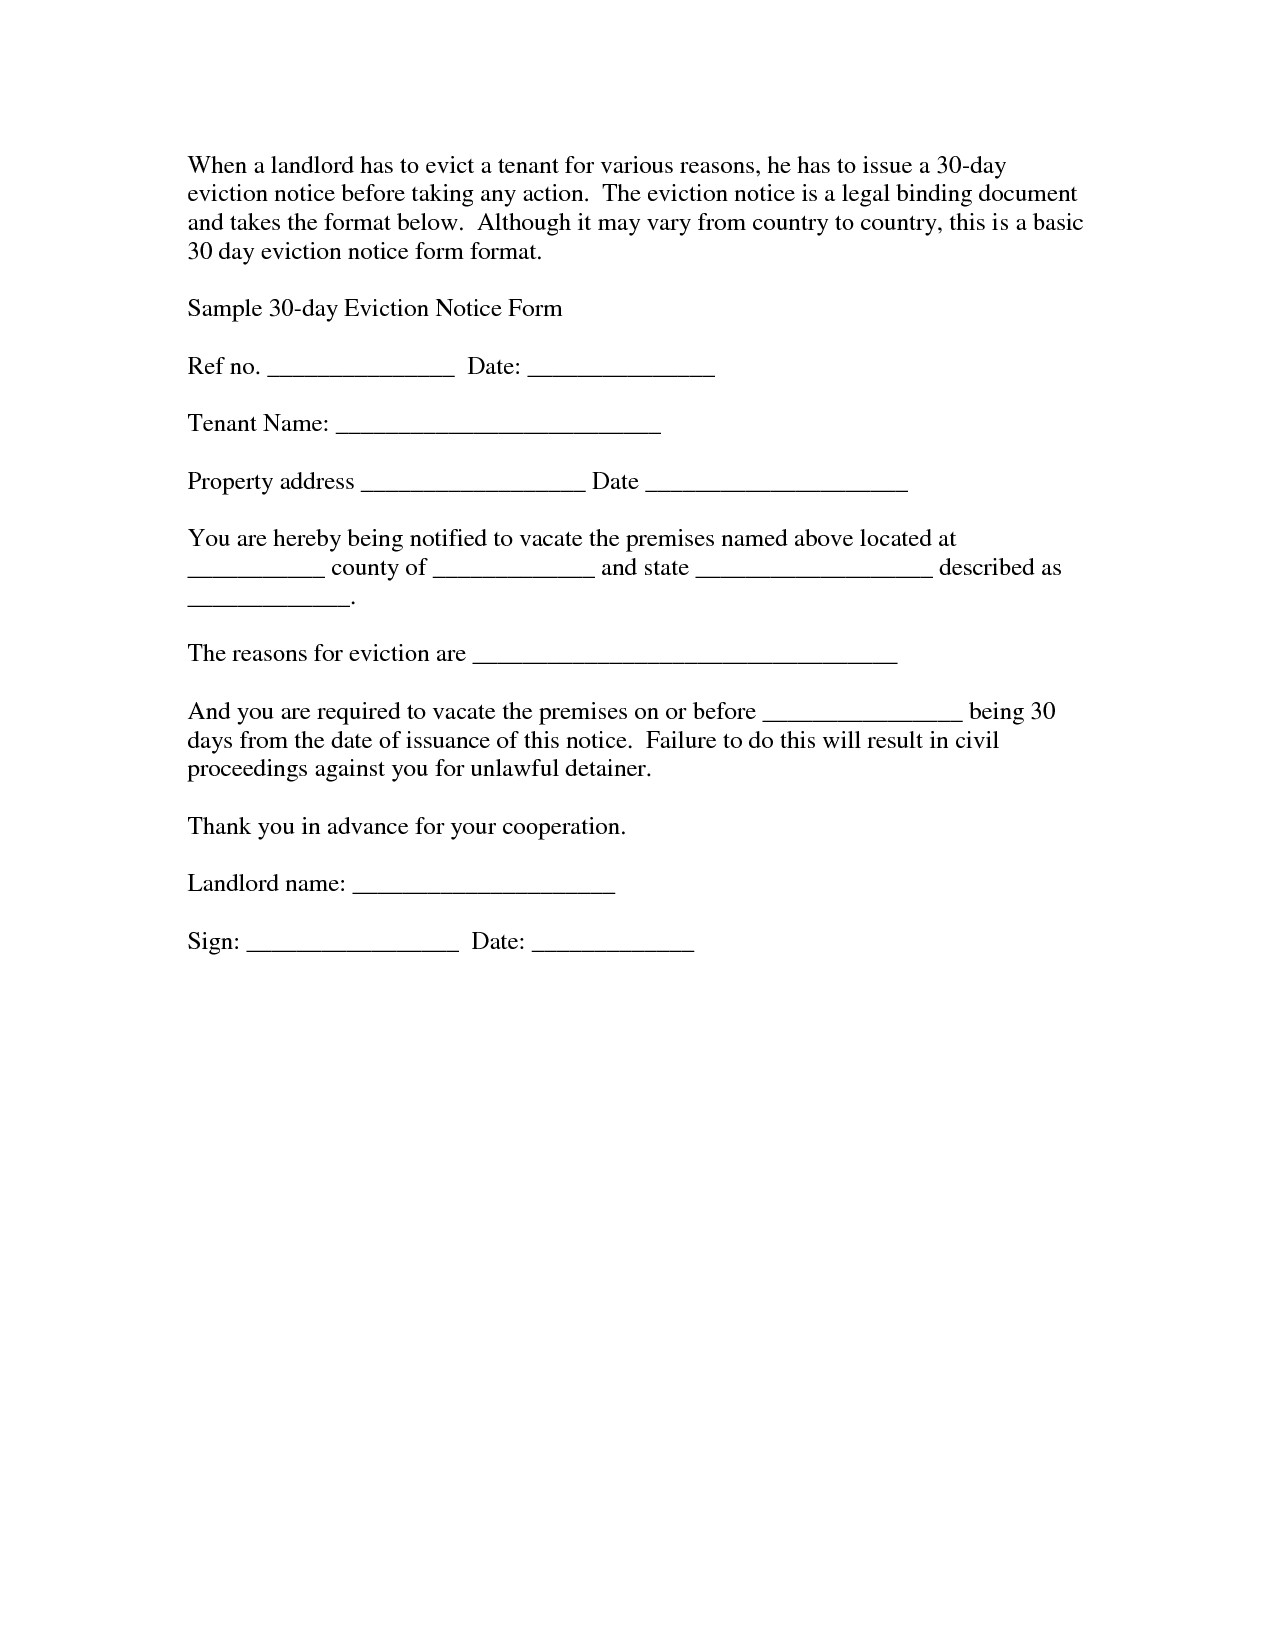 Eviction Warning Letter Template - Eviction Notices Fresh Equipment Purchase Agreement